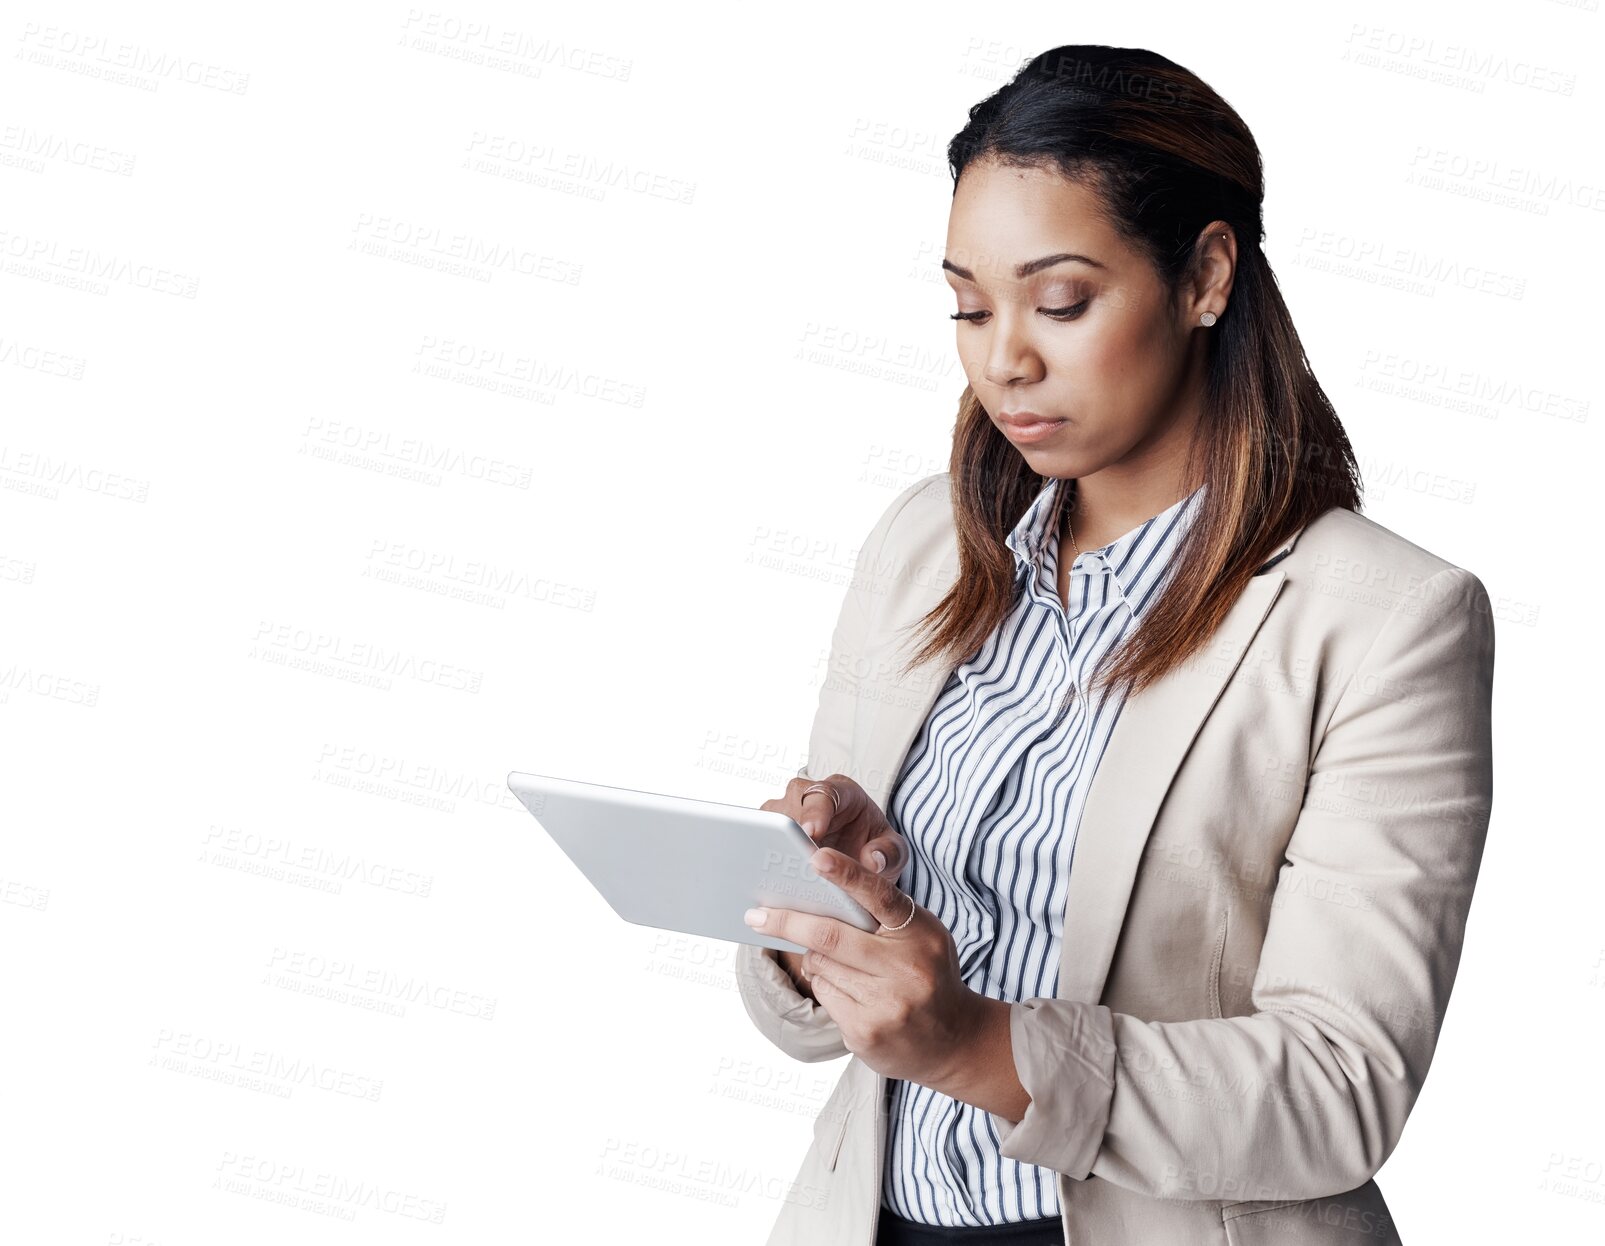 Buy stock photo Business woman, tablet and typing for research, communication or networking on a transparent PNG background. Young female person or employee reading on technology for online search, internet or web